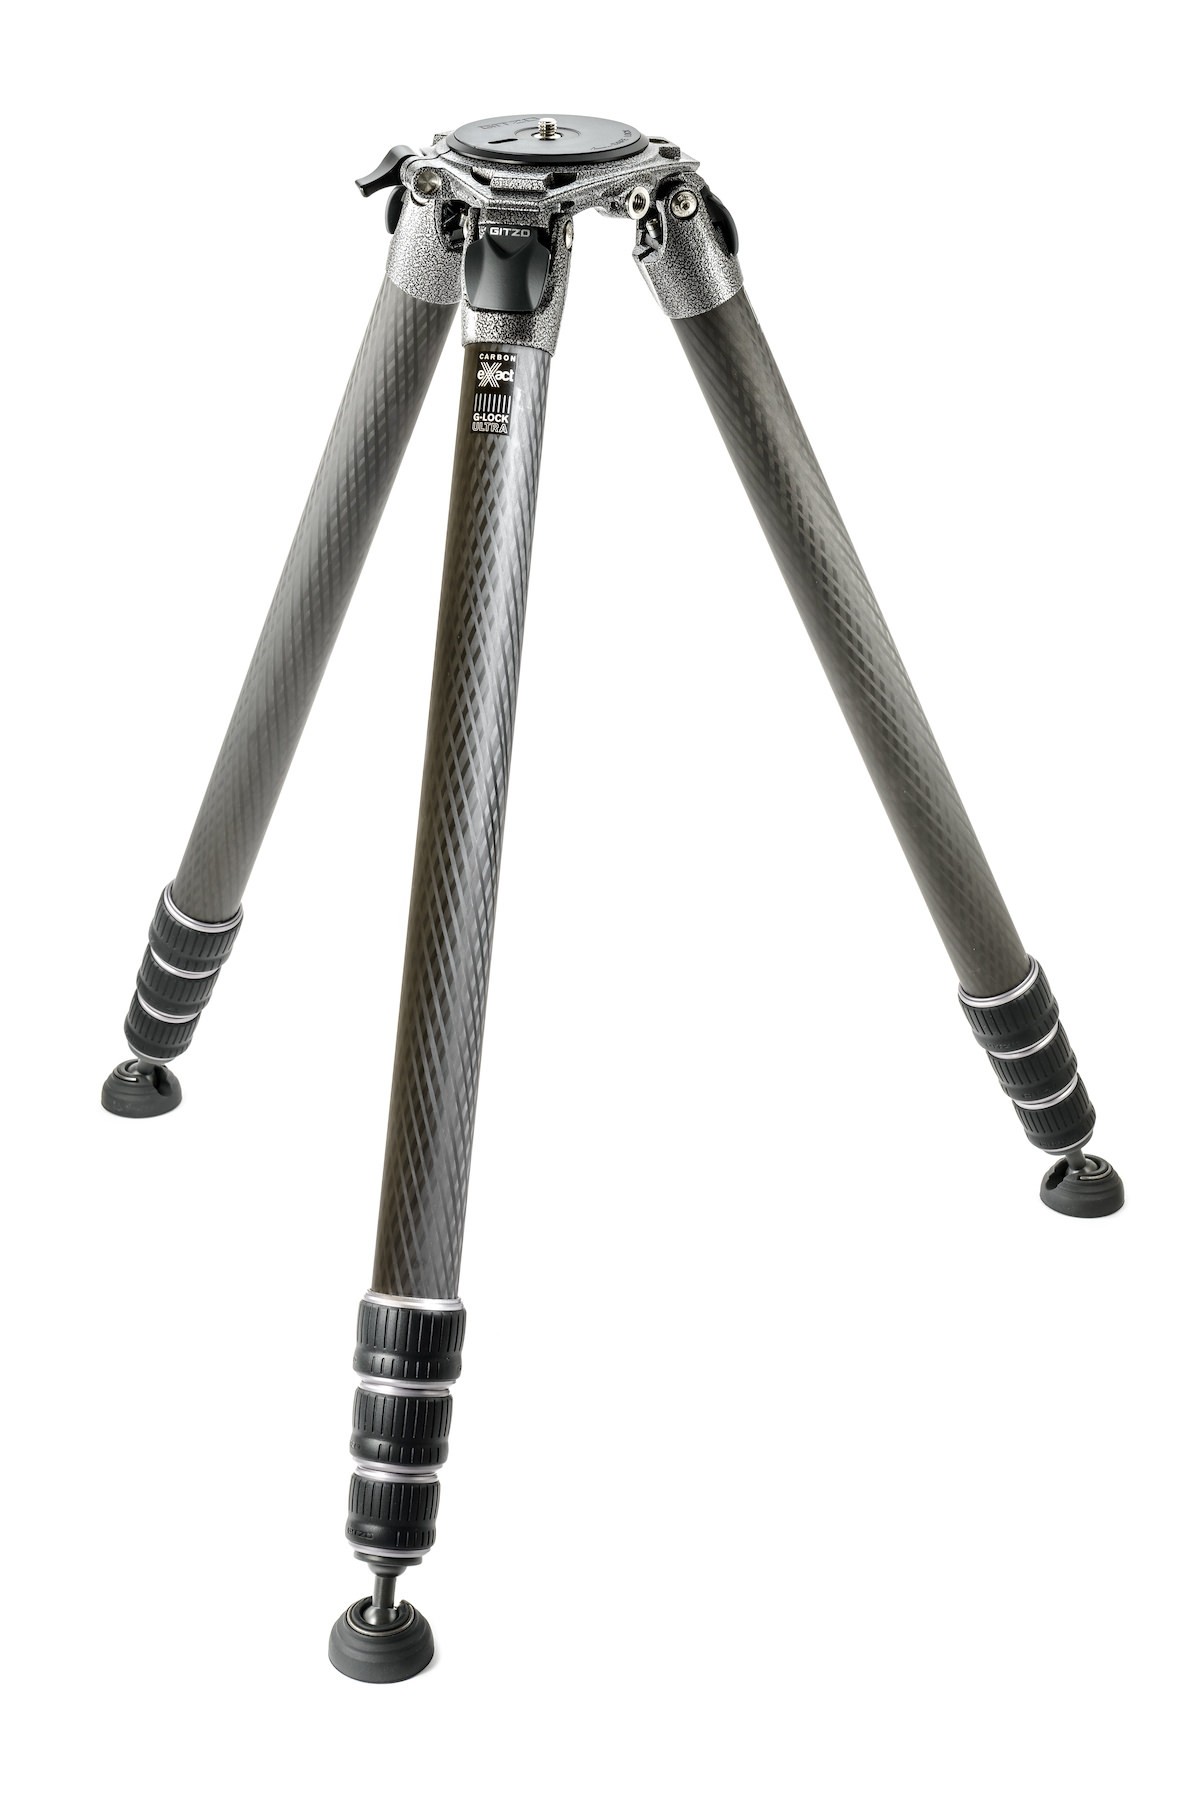 Gitzo tripod Systematic, series 5 XL, 4 sections